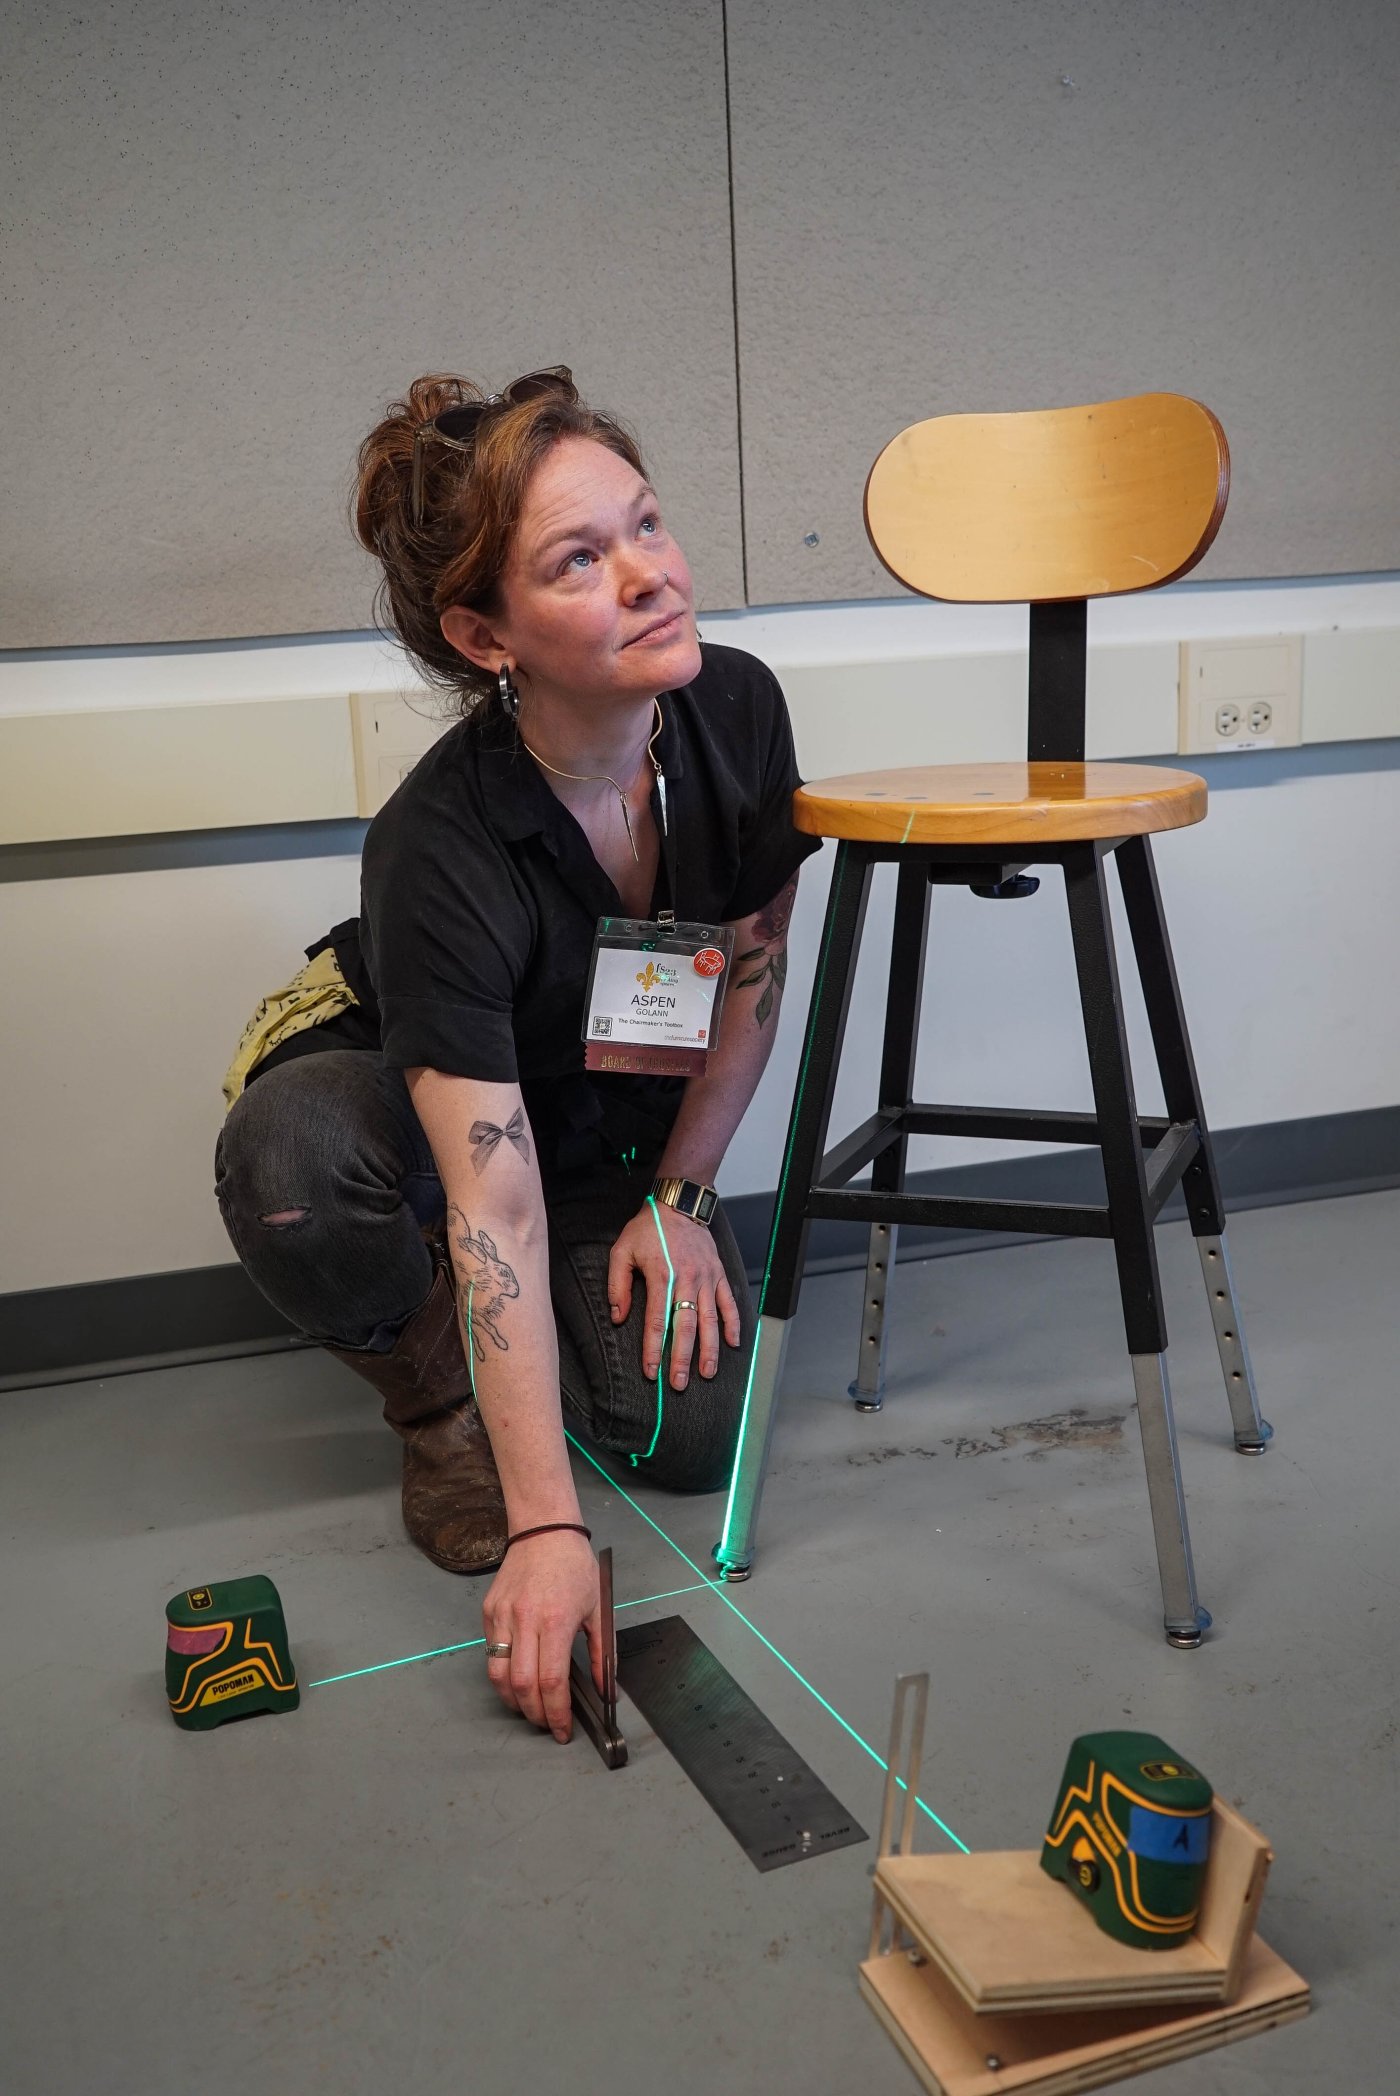 Aspen Golann demonstrates compound angle drilling techniques using tools on the floor at the conference.